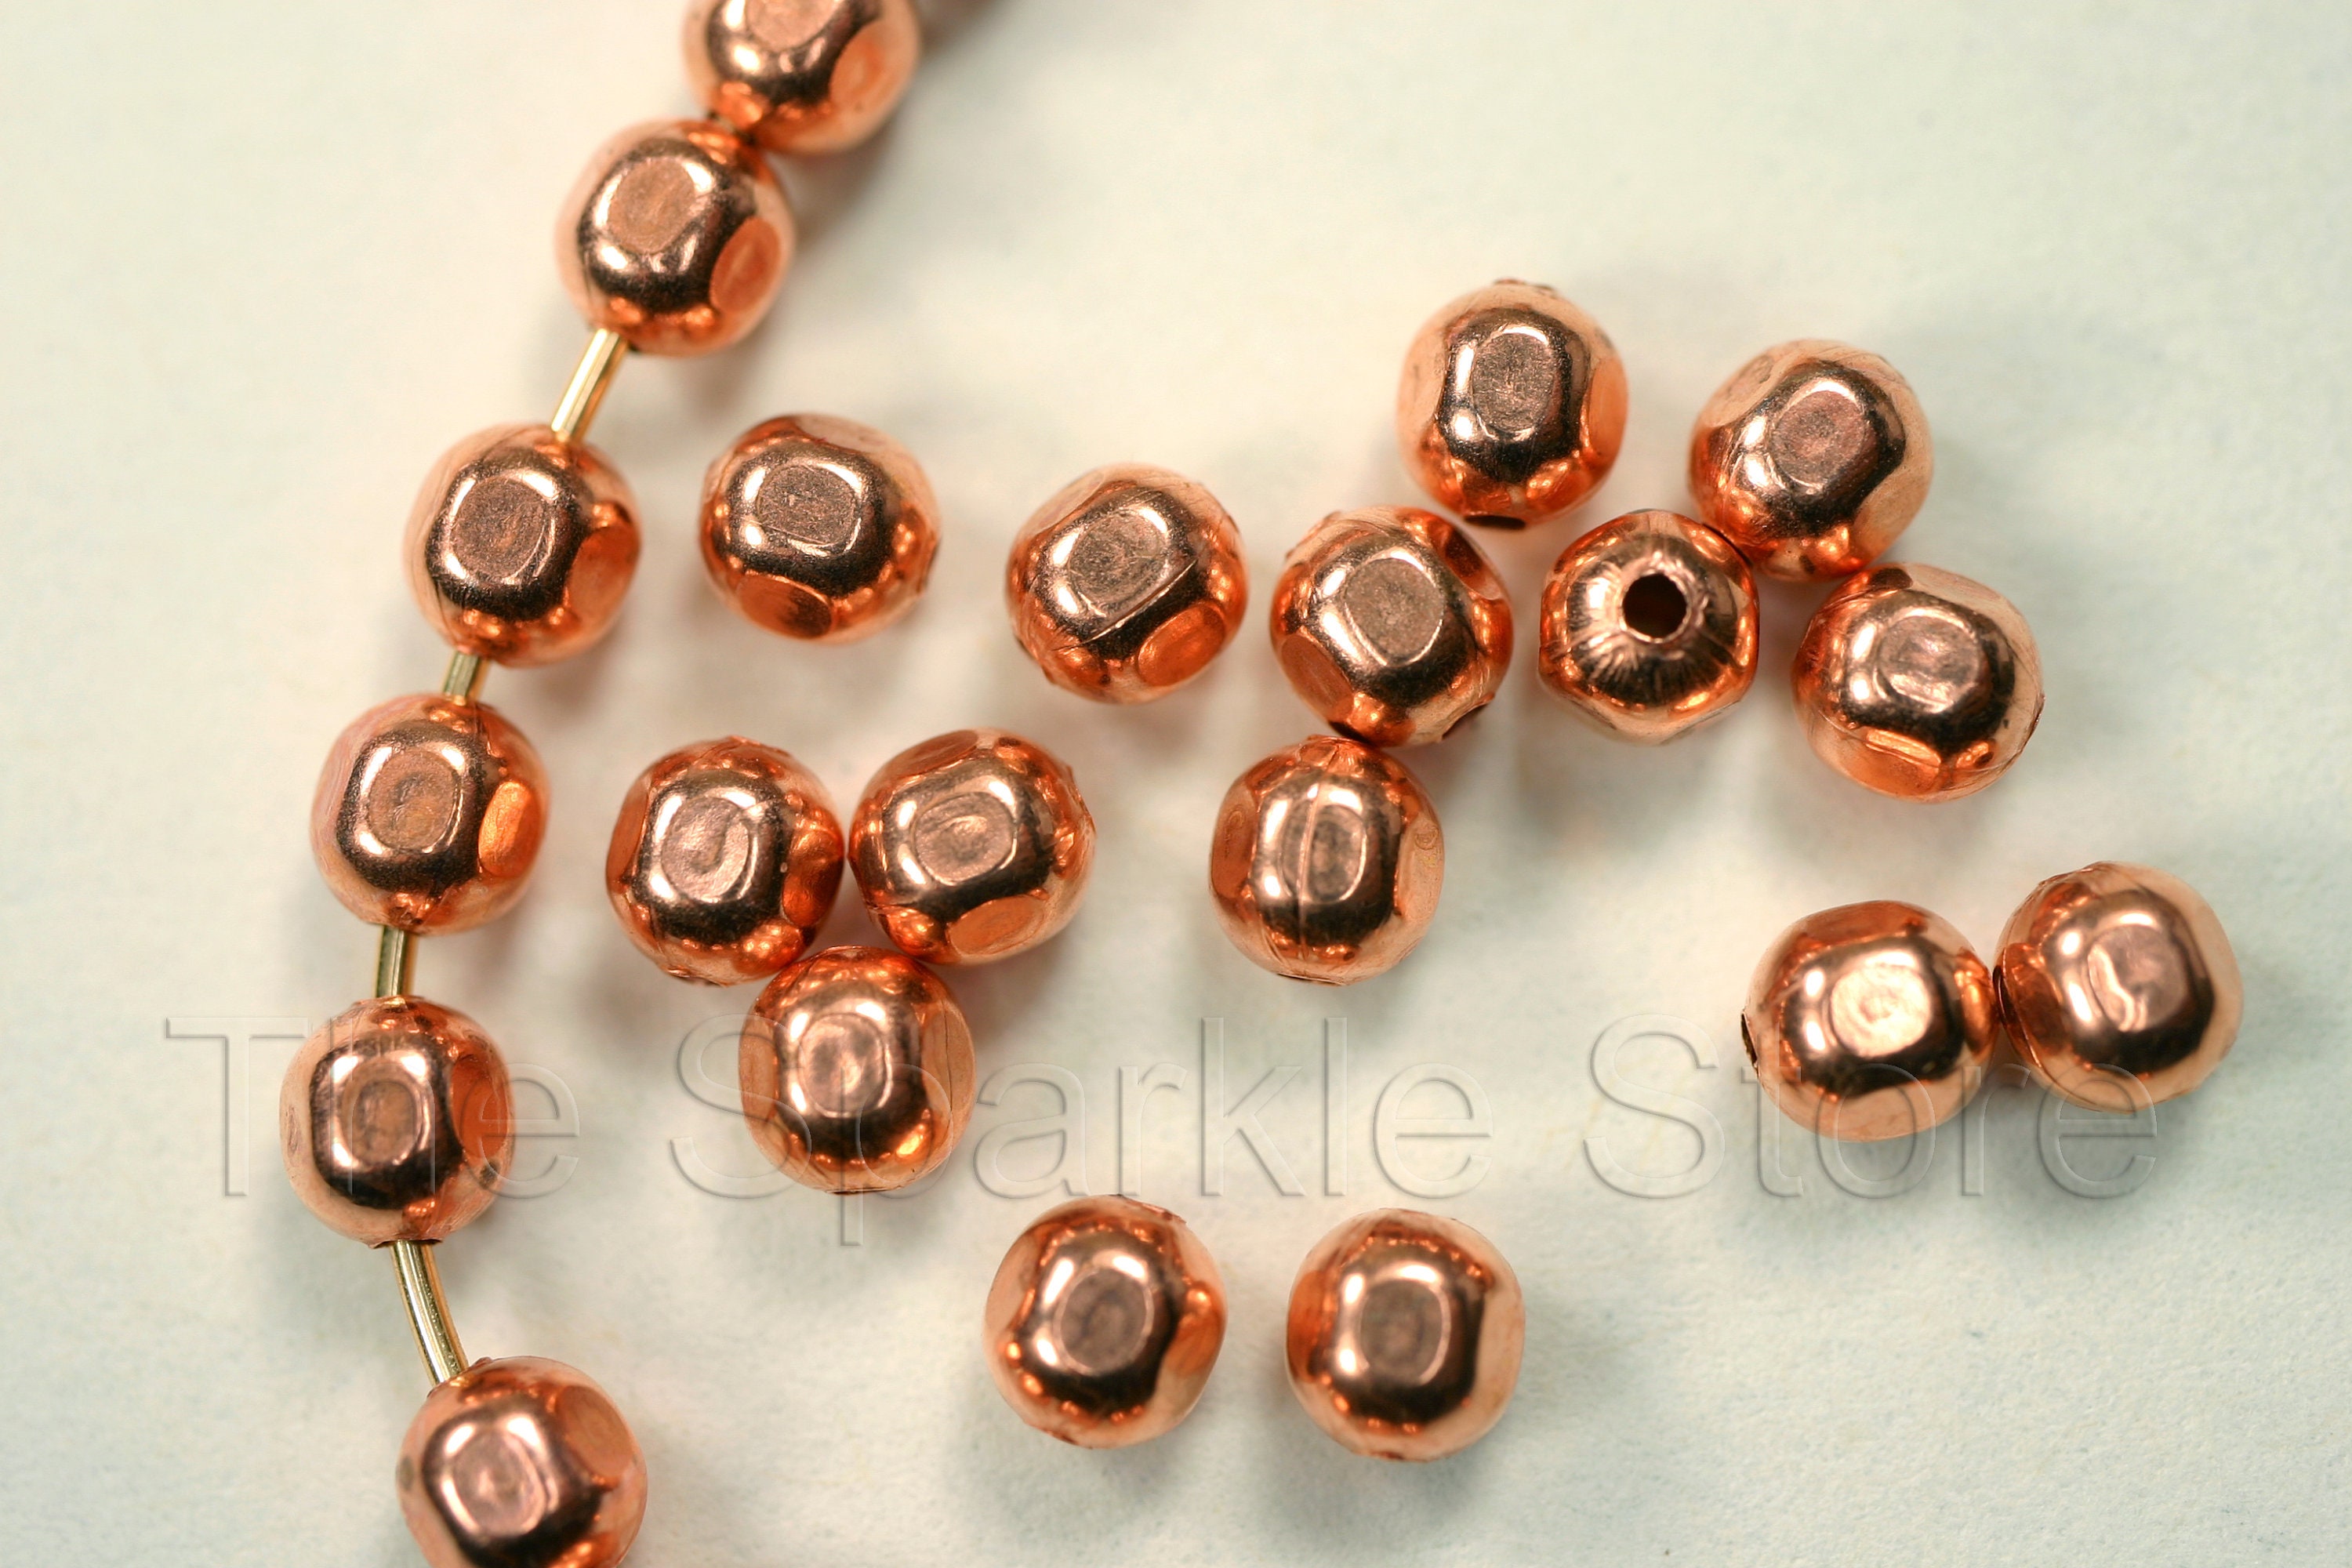 Faceted and Sparkly Solid Copper Beads, Small 3.5mm X 4mm Beads, Made in  the USA, Fits Onto 20 Gauge or Finer Wire, 100 Beads 04-1004A 